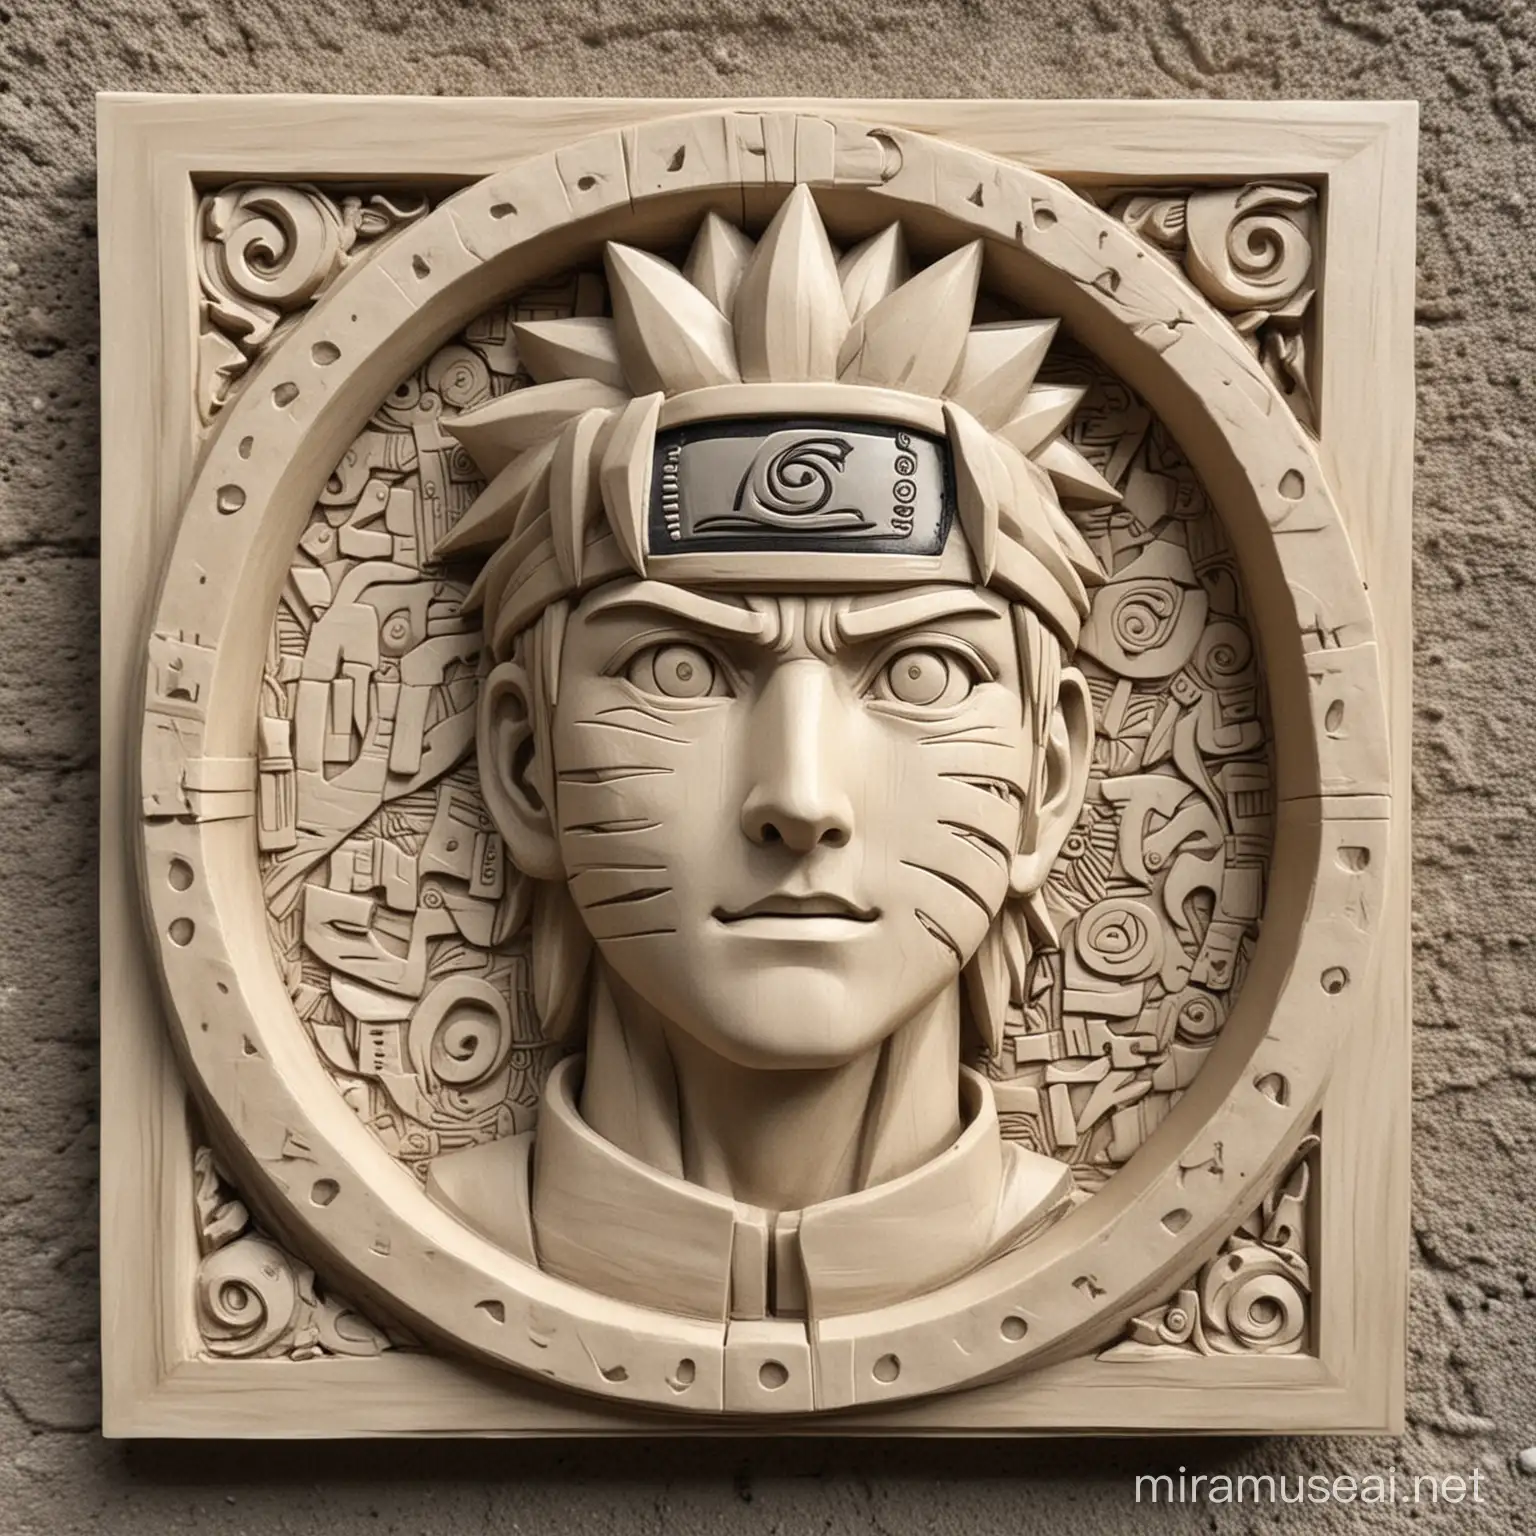 Naruto Inspired Bas Relief Art Dynamic Characters in Textured Relief Sculpture